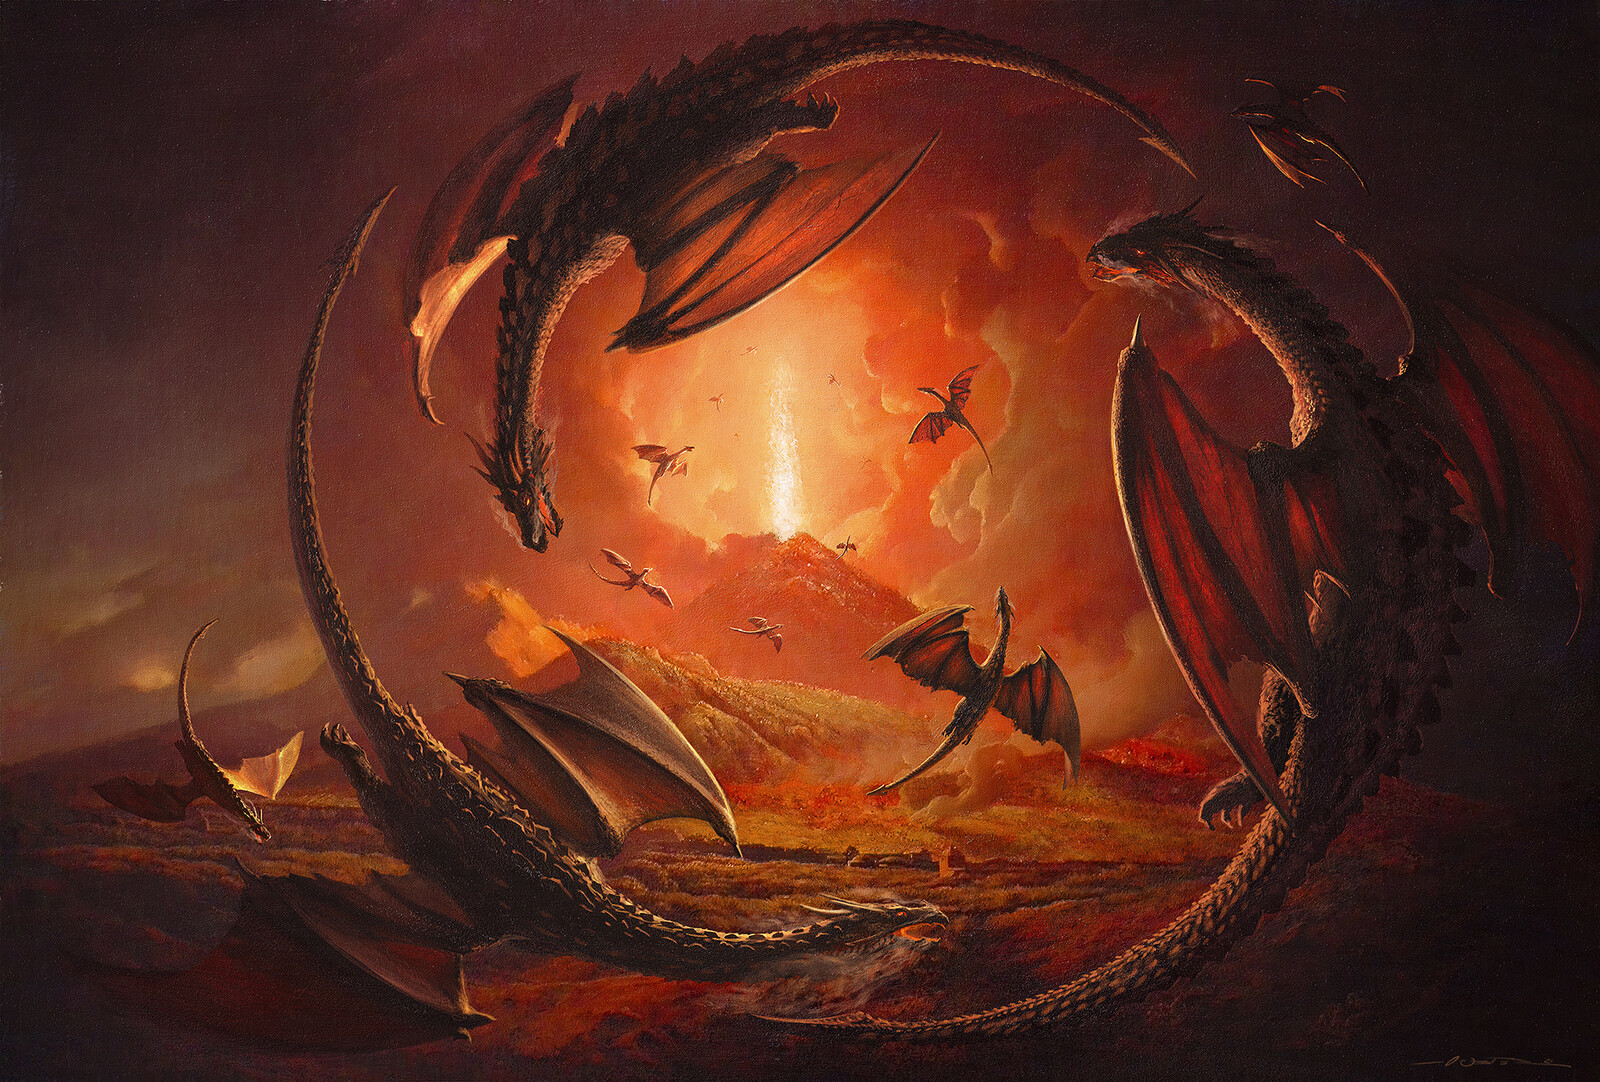 Dragons at Vesuvius from Portici after J.W. of Derby